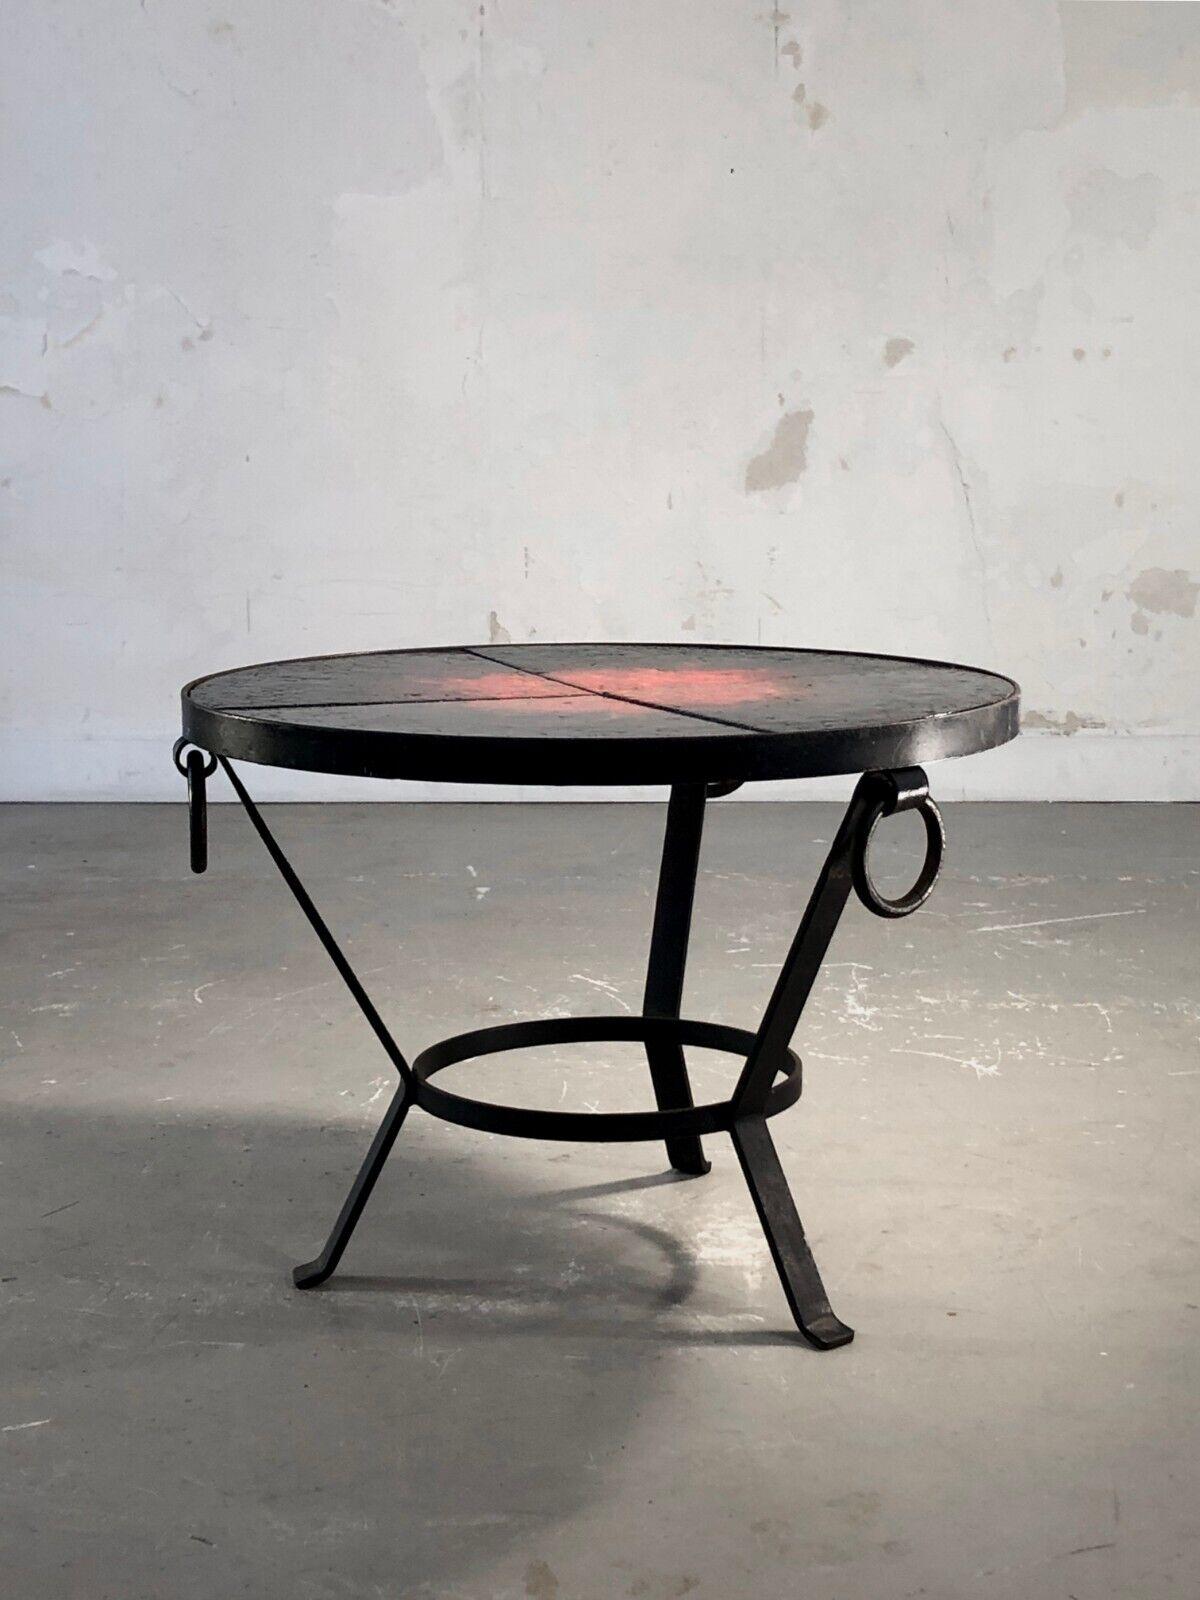 Wrought Iron A MID-CENTURY-MODERN BRUTALIST MODERNIST Ceramic COFFEE SIDE TABLE, France 1950 For Sale